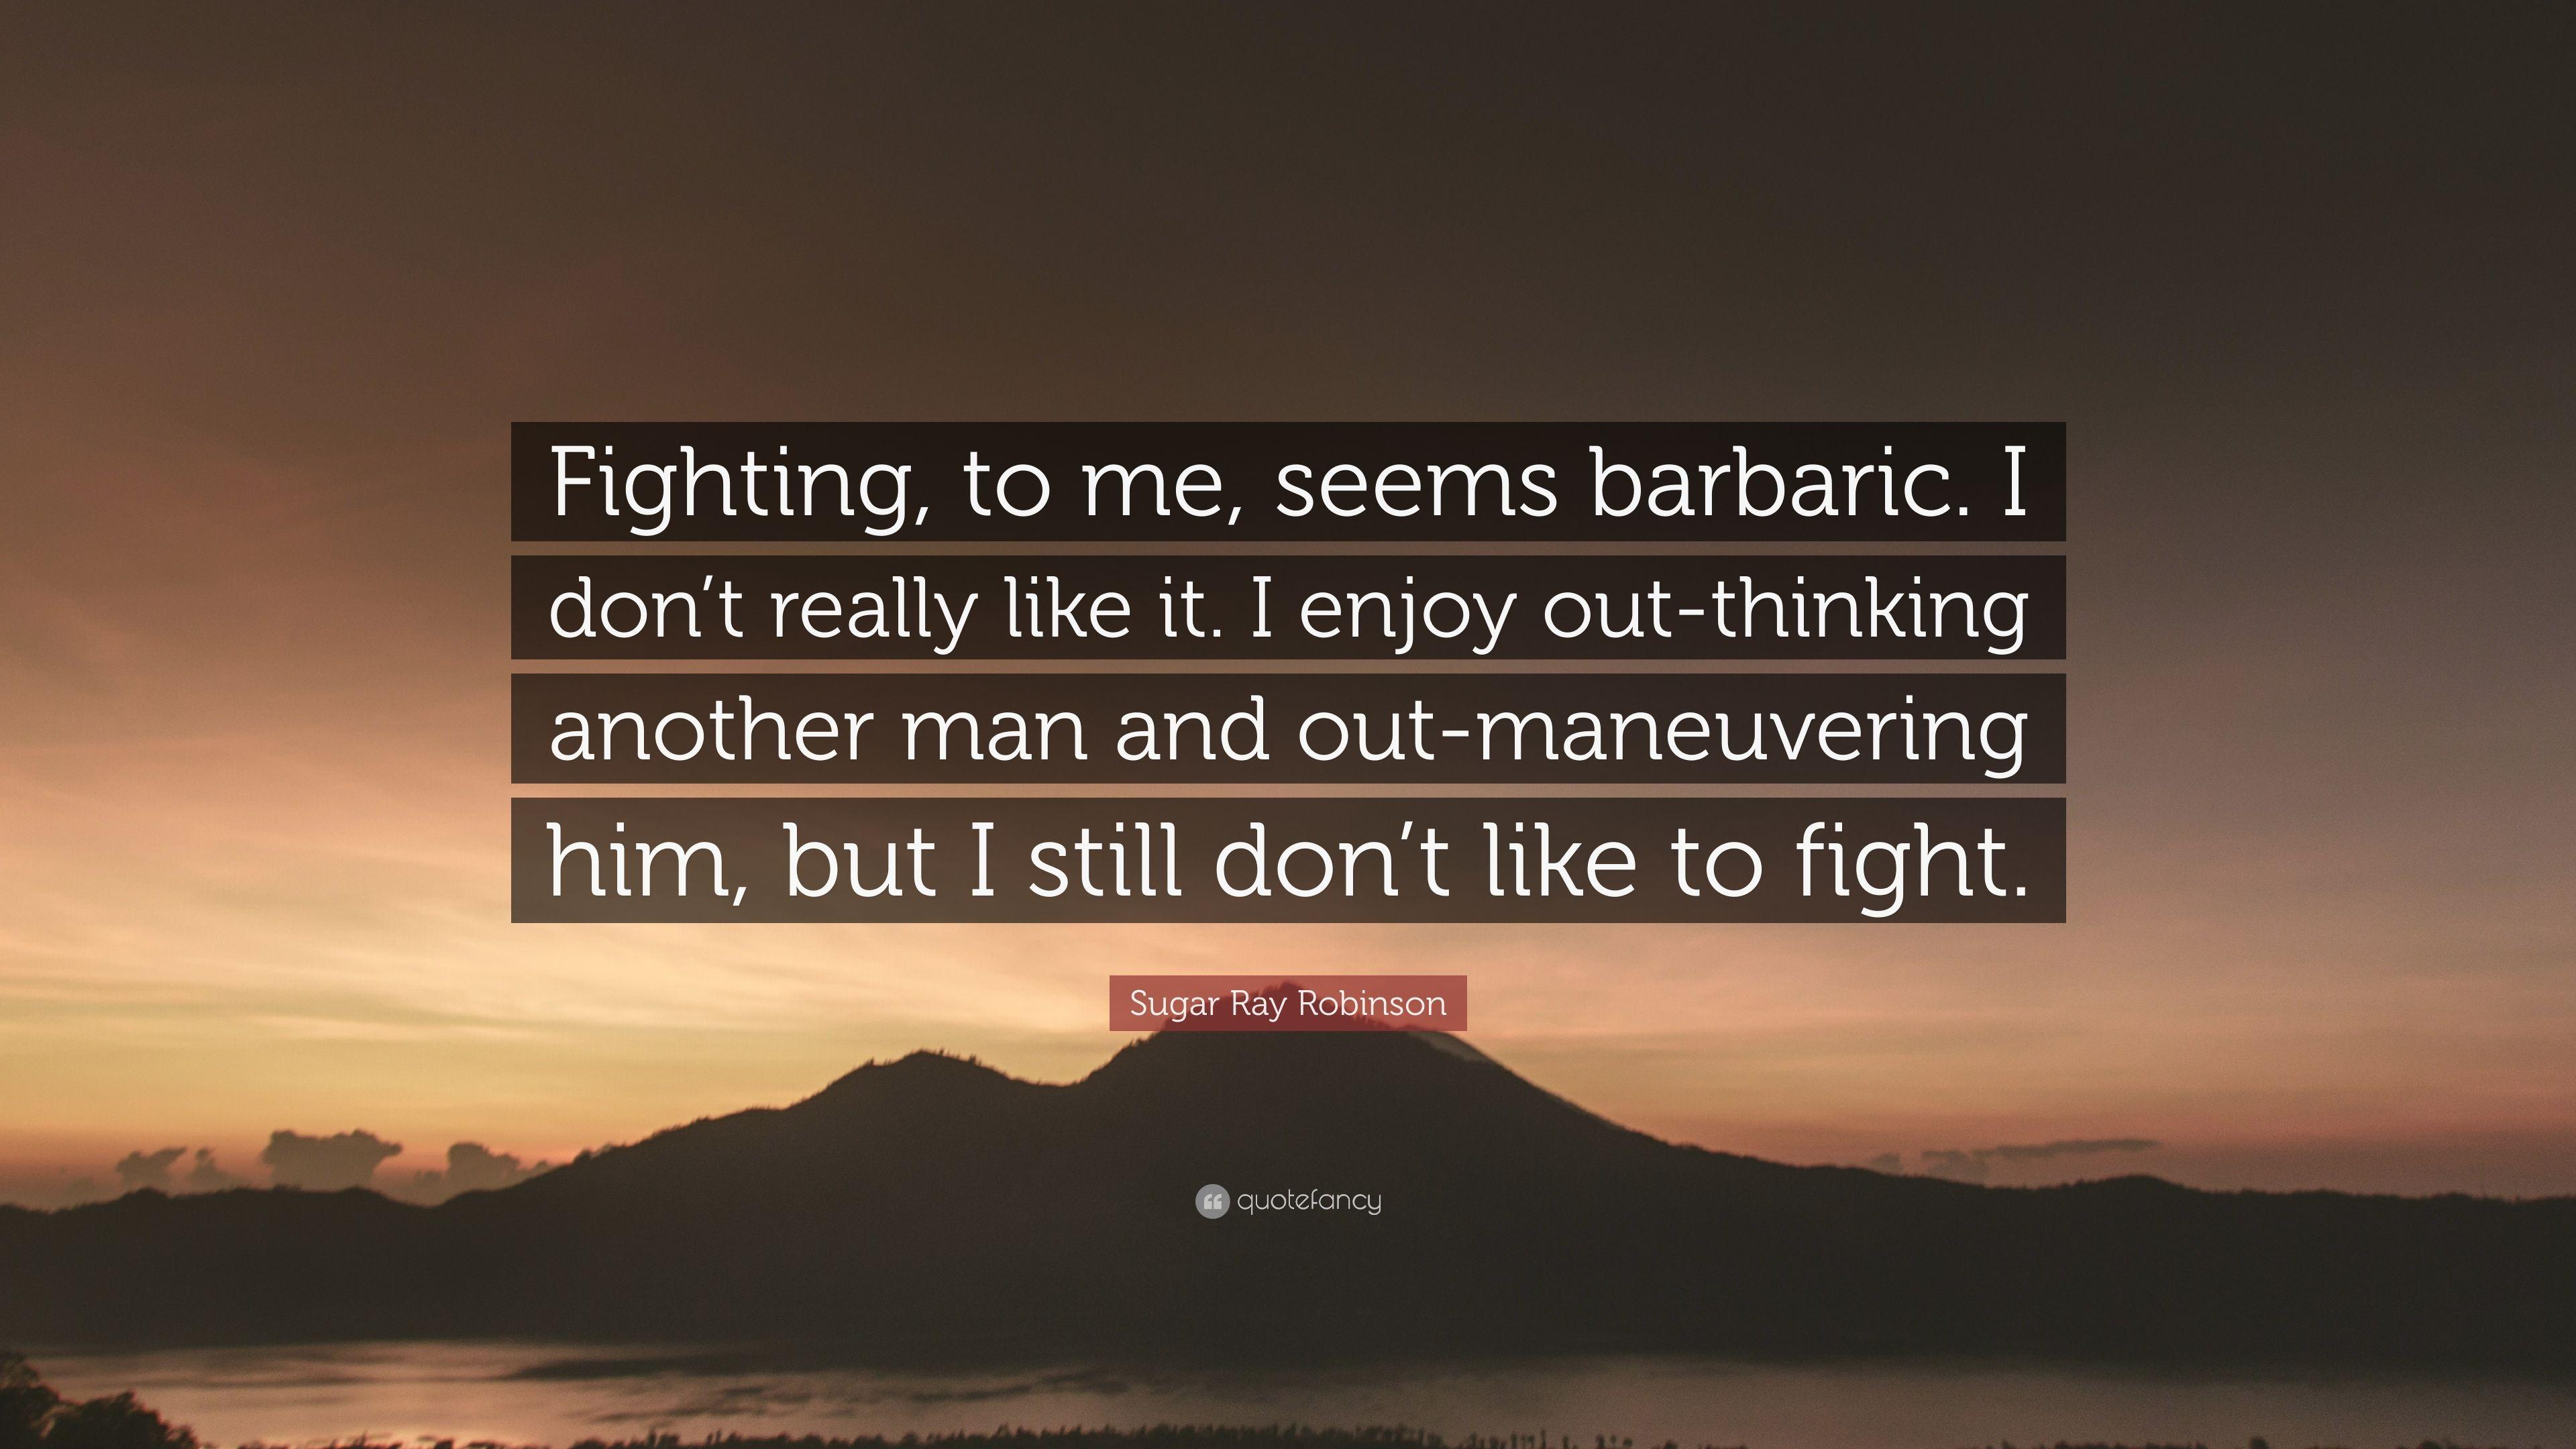 Sugar Ray Robinson Quote: “Fighting, to me, seems barbaric. I don't